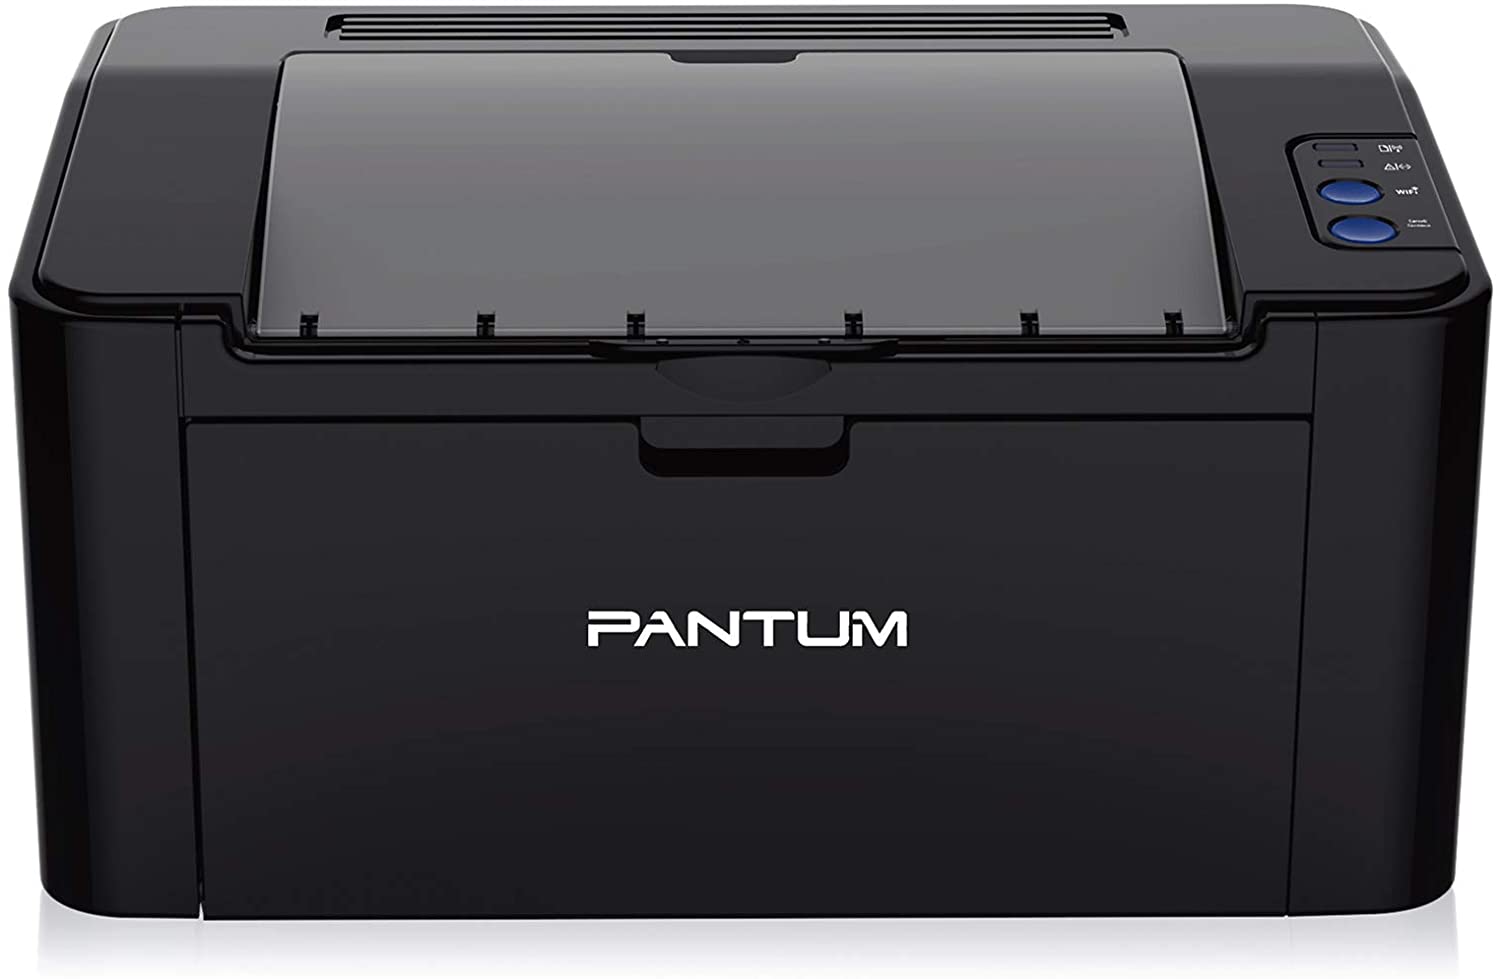 Pantum P2502W Monochrome Home Laser Printer with Wireless Networking and Mobile Printing for Home Use